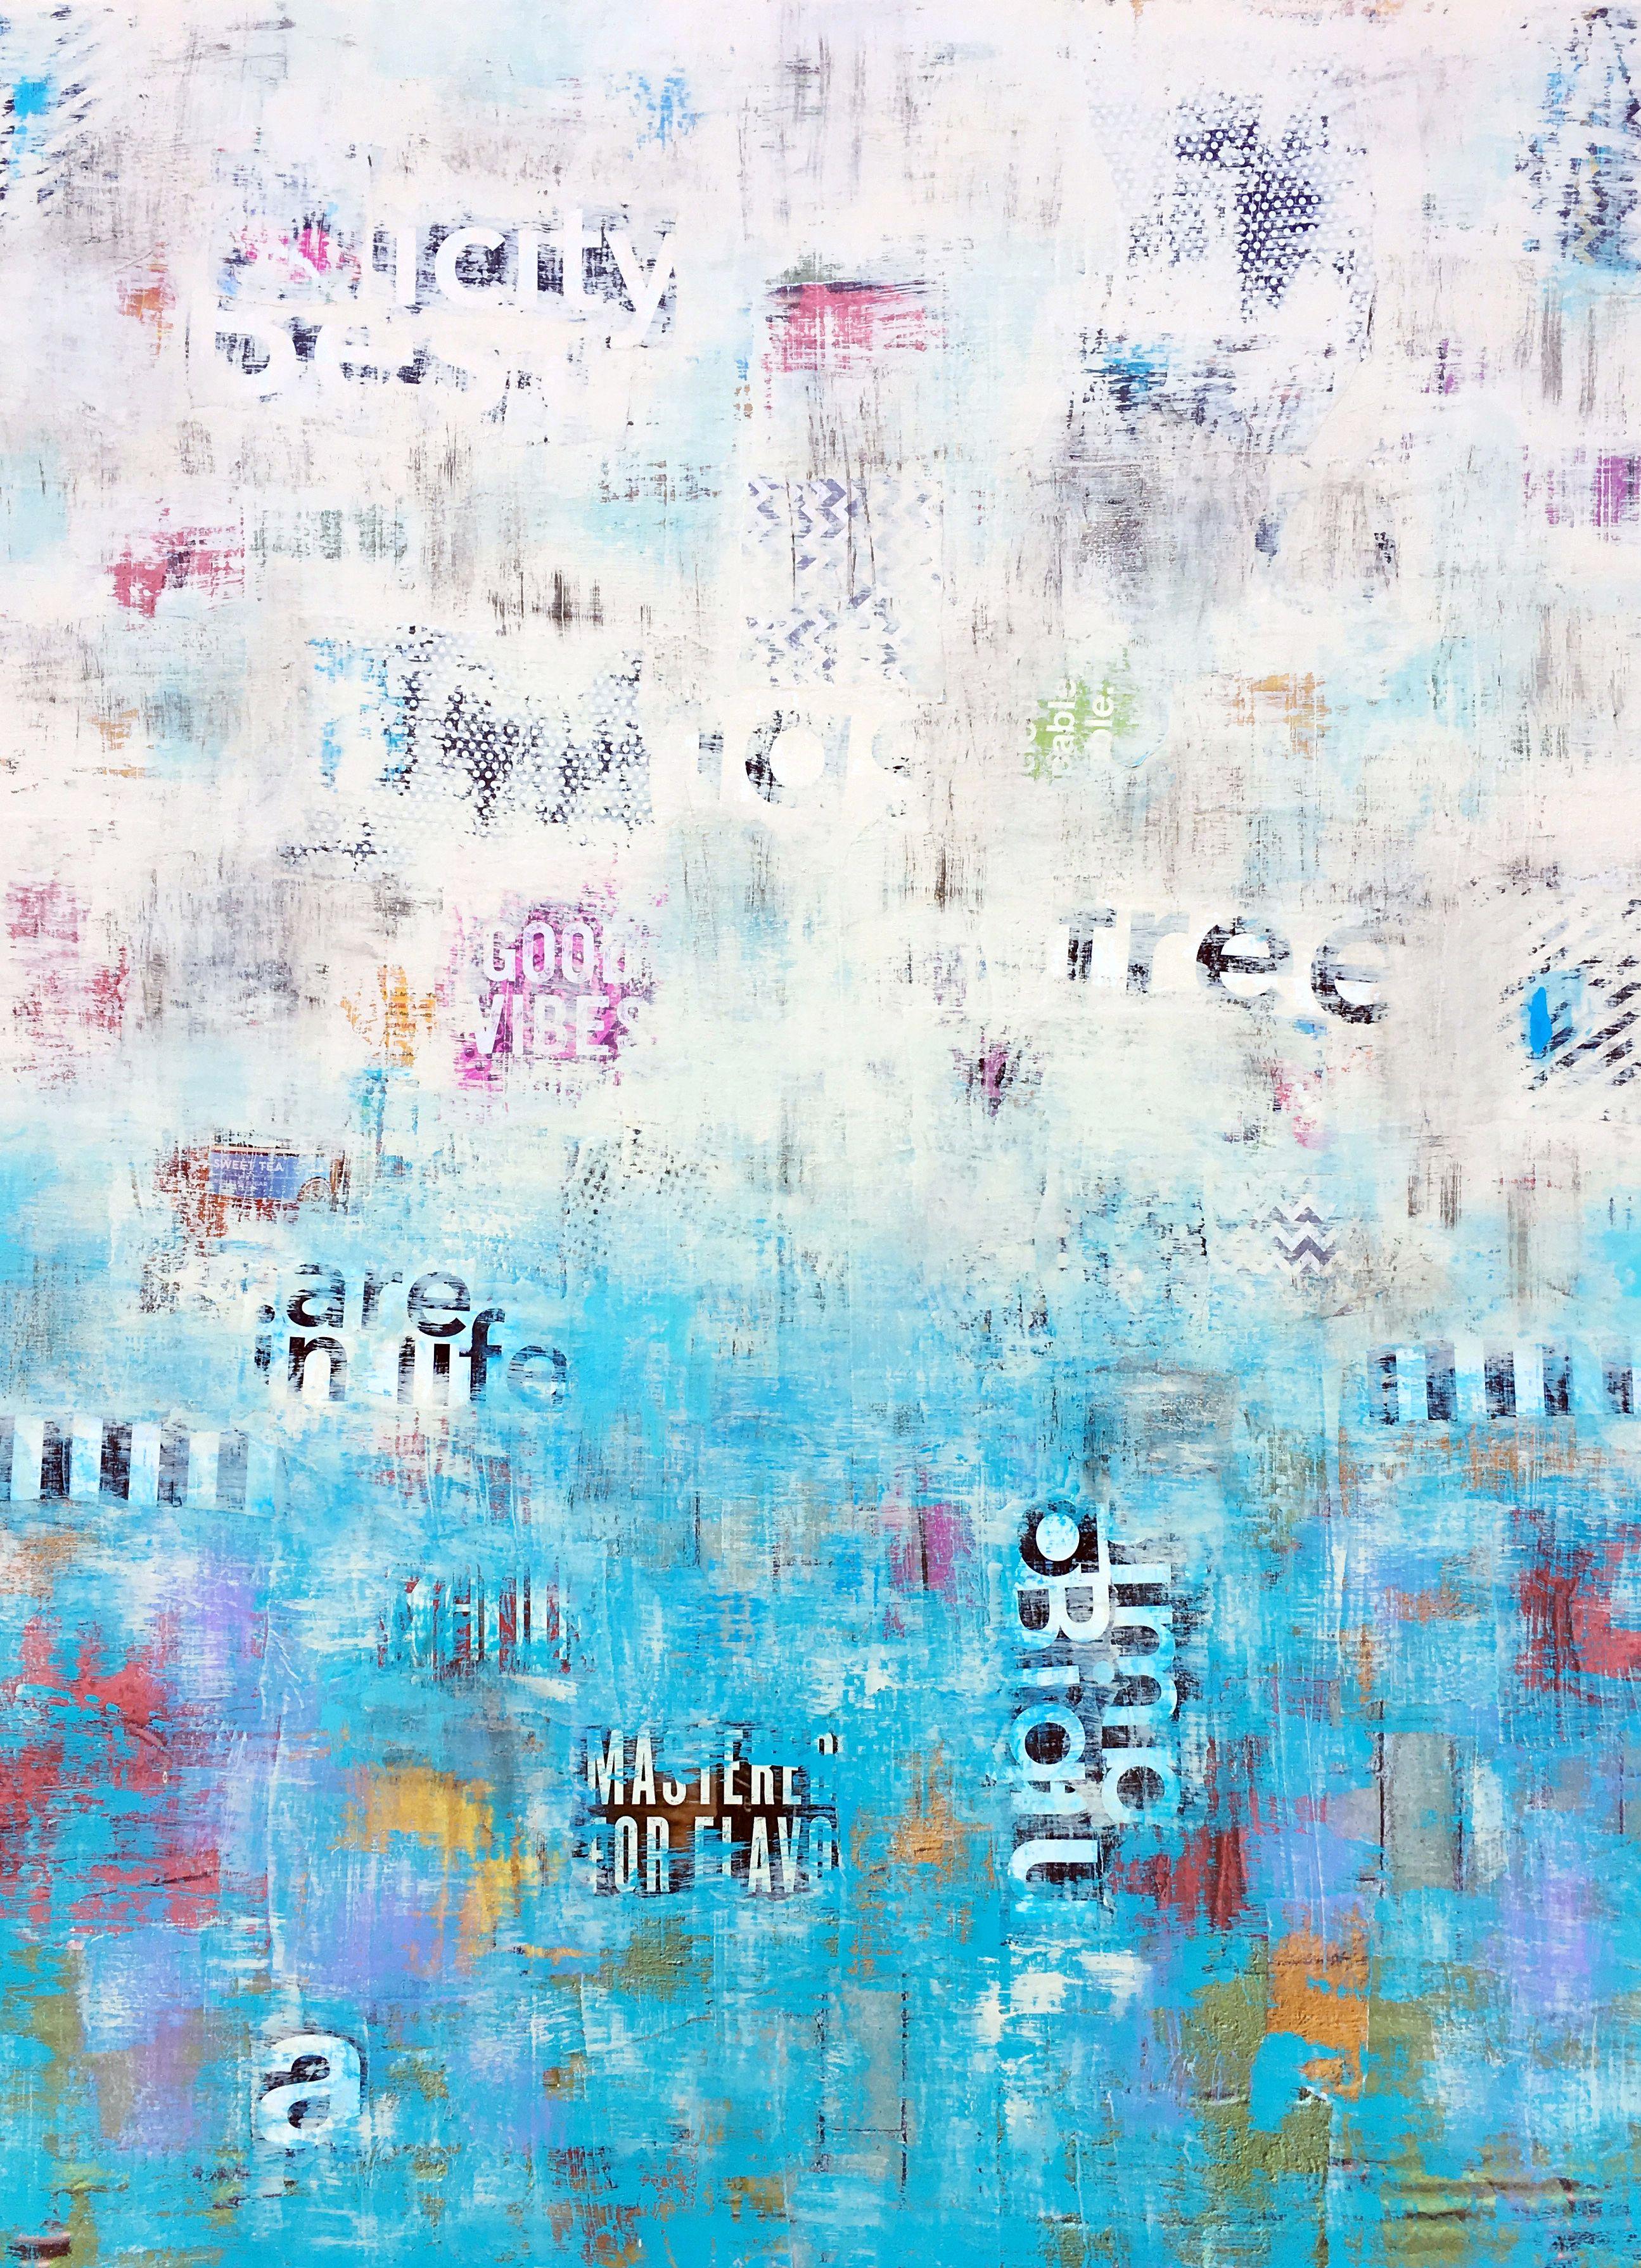 Beauty Beyond the Surface, Mixed Media on Canvas - Mixed Media Art by Robin Jorgensen